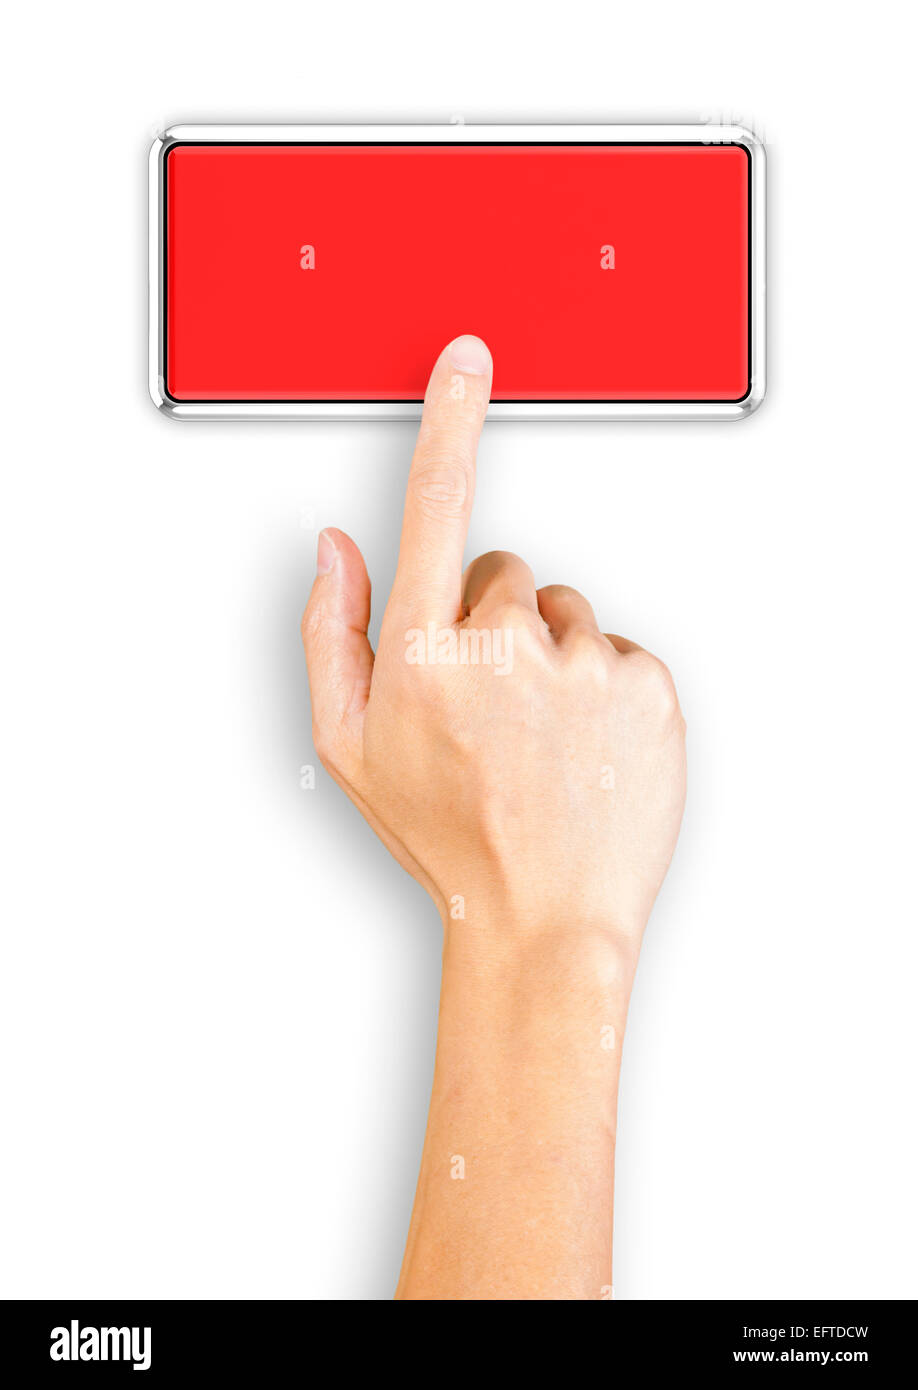 Hand clicking a red button, top view Stock Photo